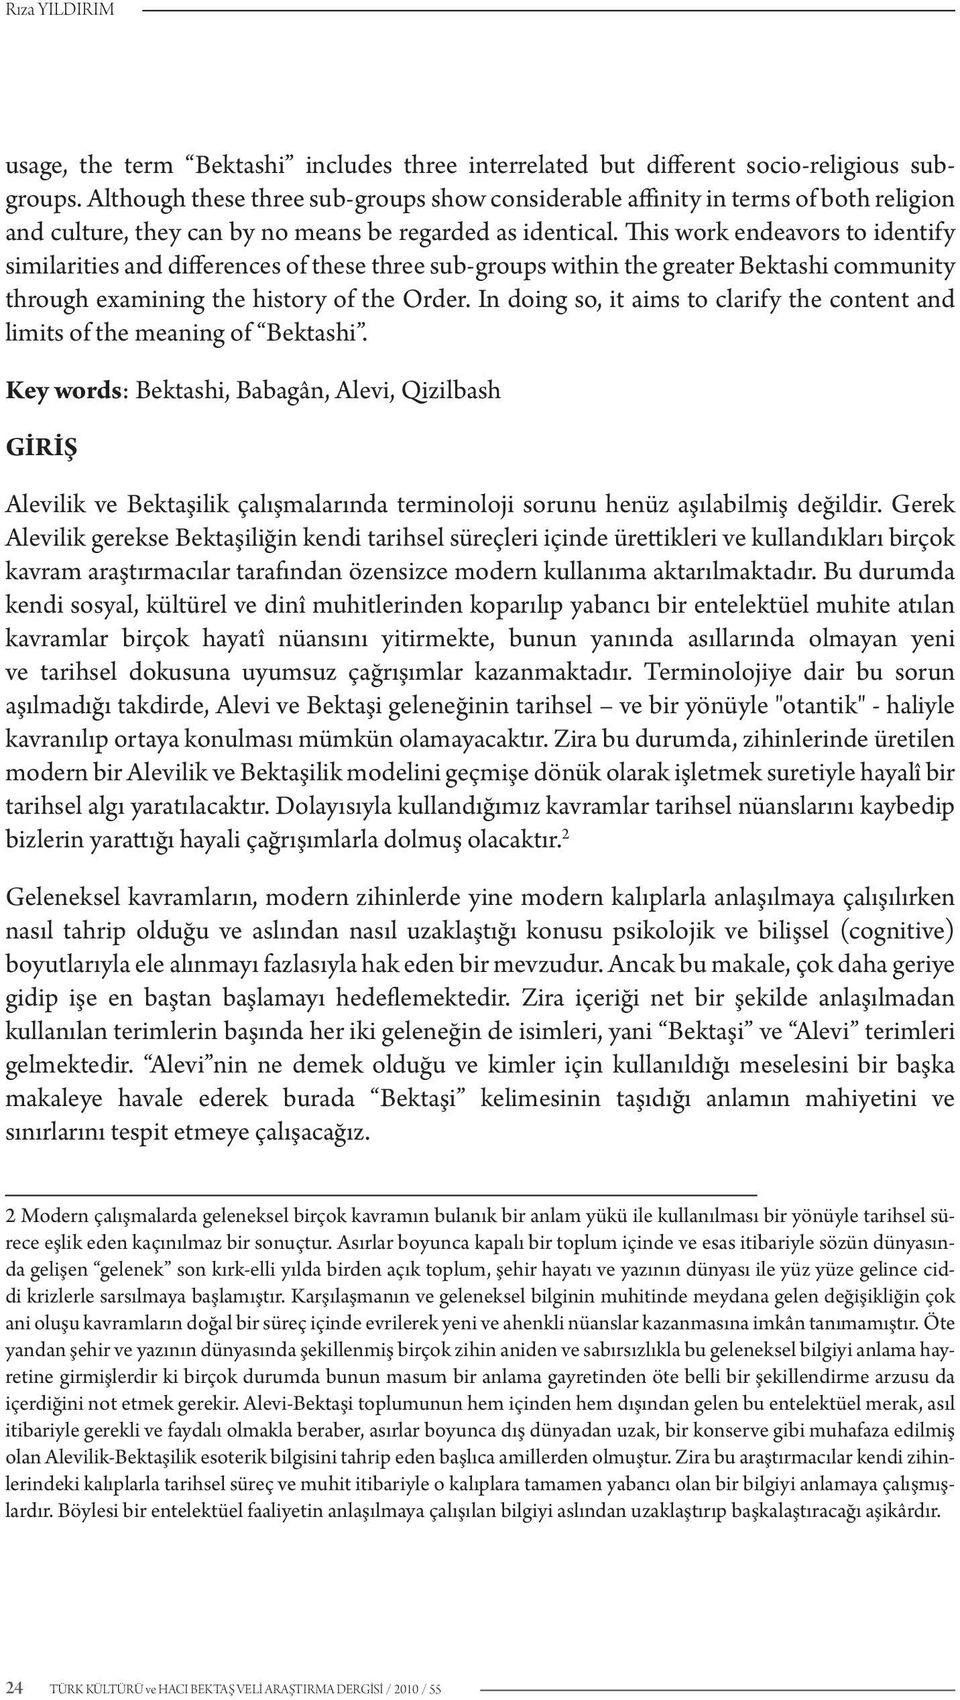 This work endeavors to identify similarities and differences of these three sub-groups within the greater Bektashi community through examining the history of the Order.